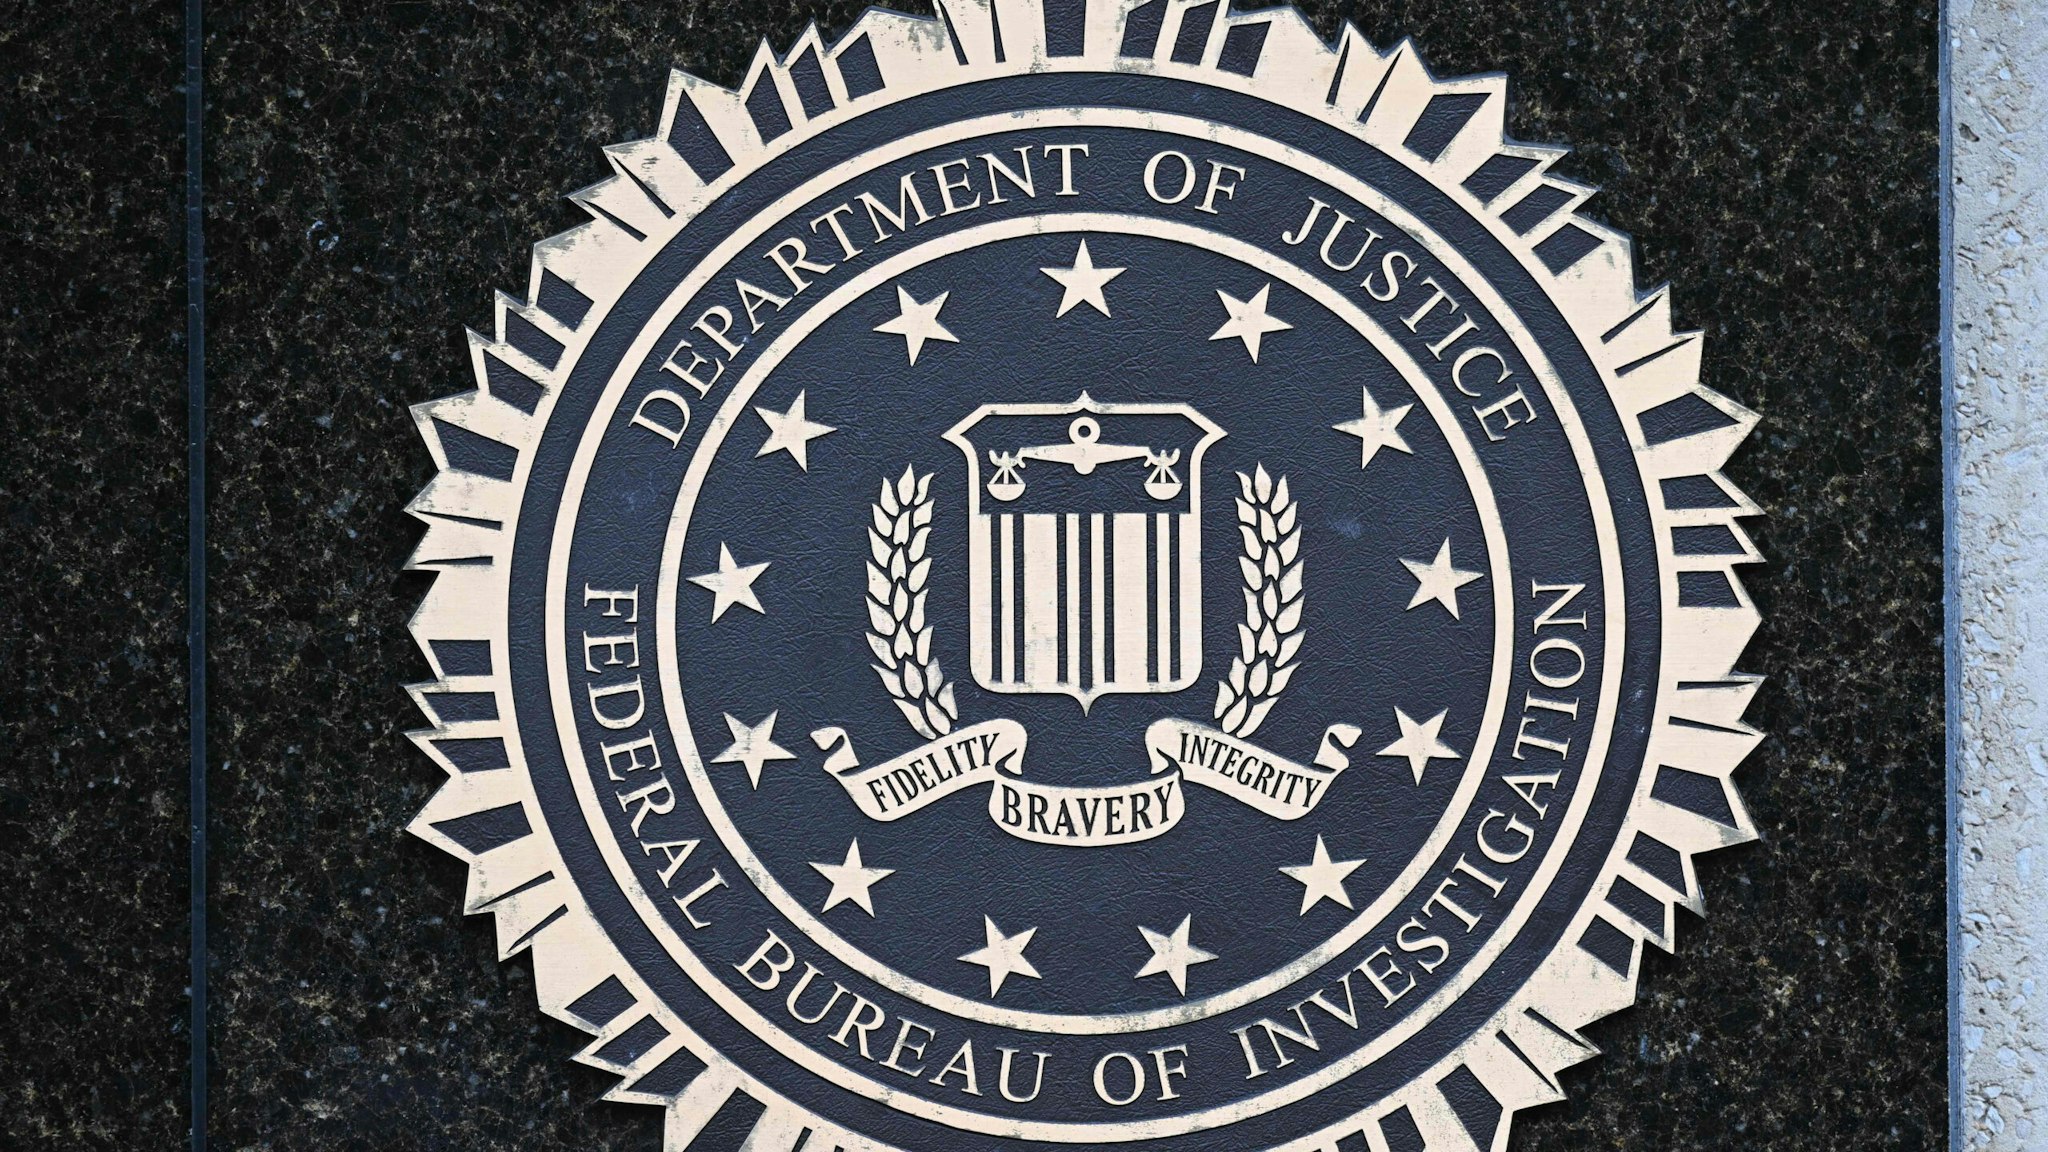 The seal of the Federal Bureau of Investigation is seen outside of its headquarters in Washington, DC on August 15, 2022. - Threats against the FBI and law enforcement agencies have increased following the search and seizure of top secret documents from former US president Donald Trump's Mar-a-Lago estate where he resides.